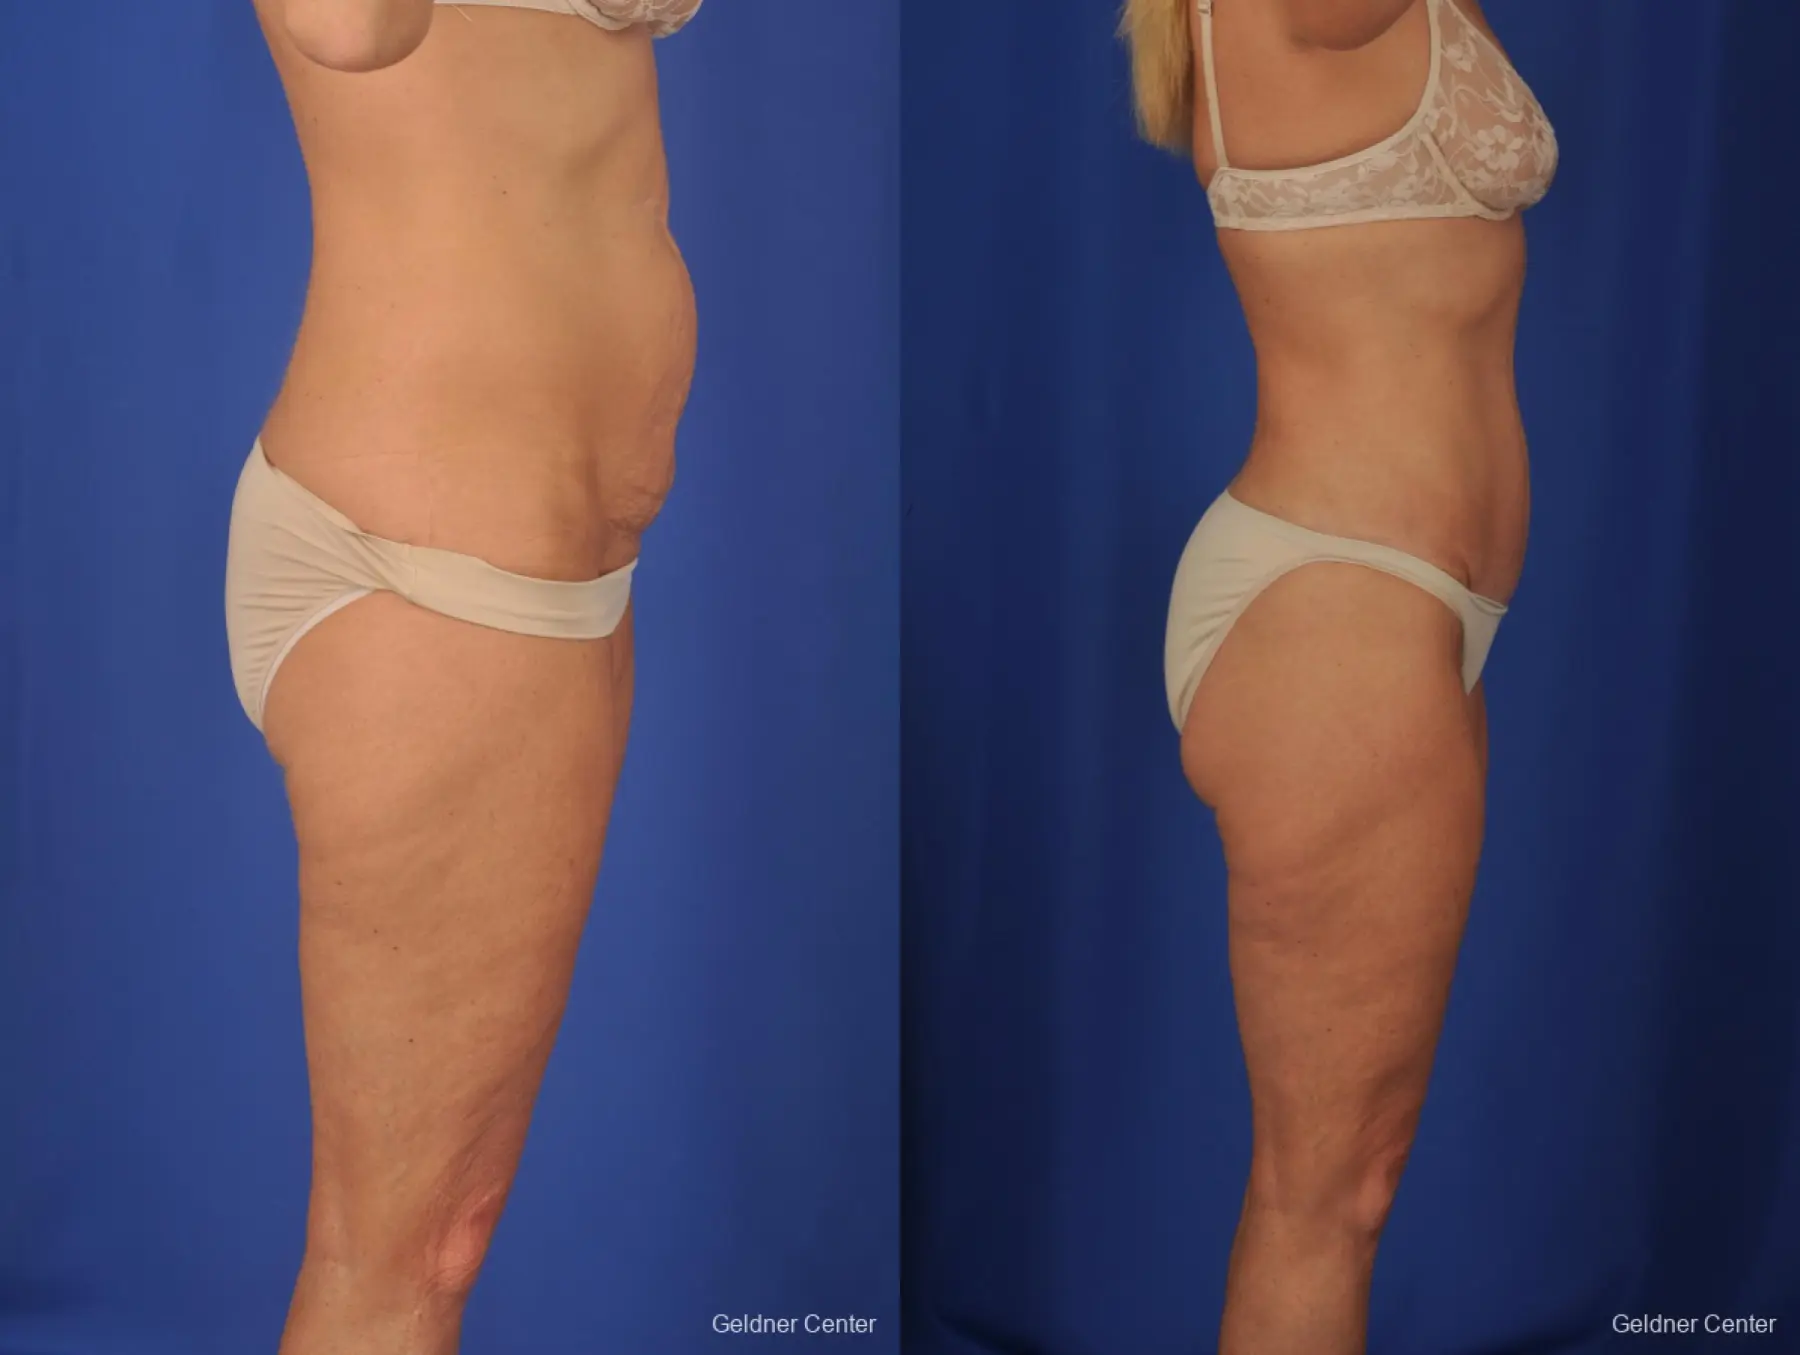 Lipoabdominoplasty: Patient 2 - Before and After 3